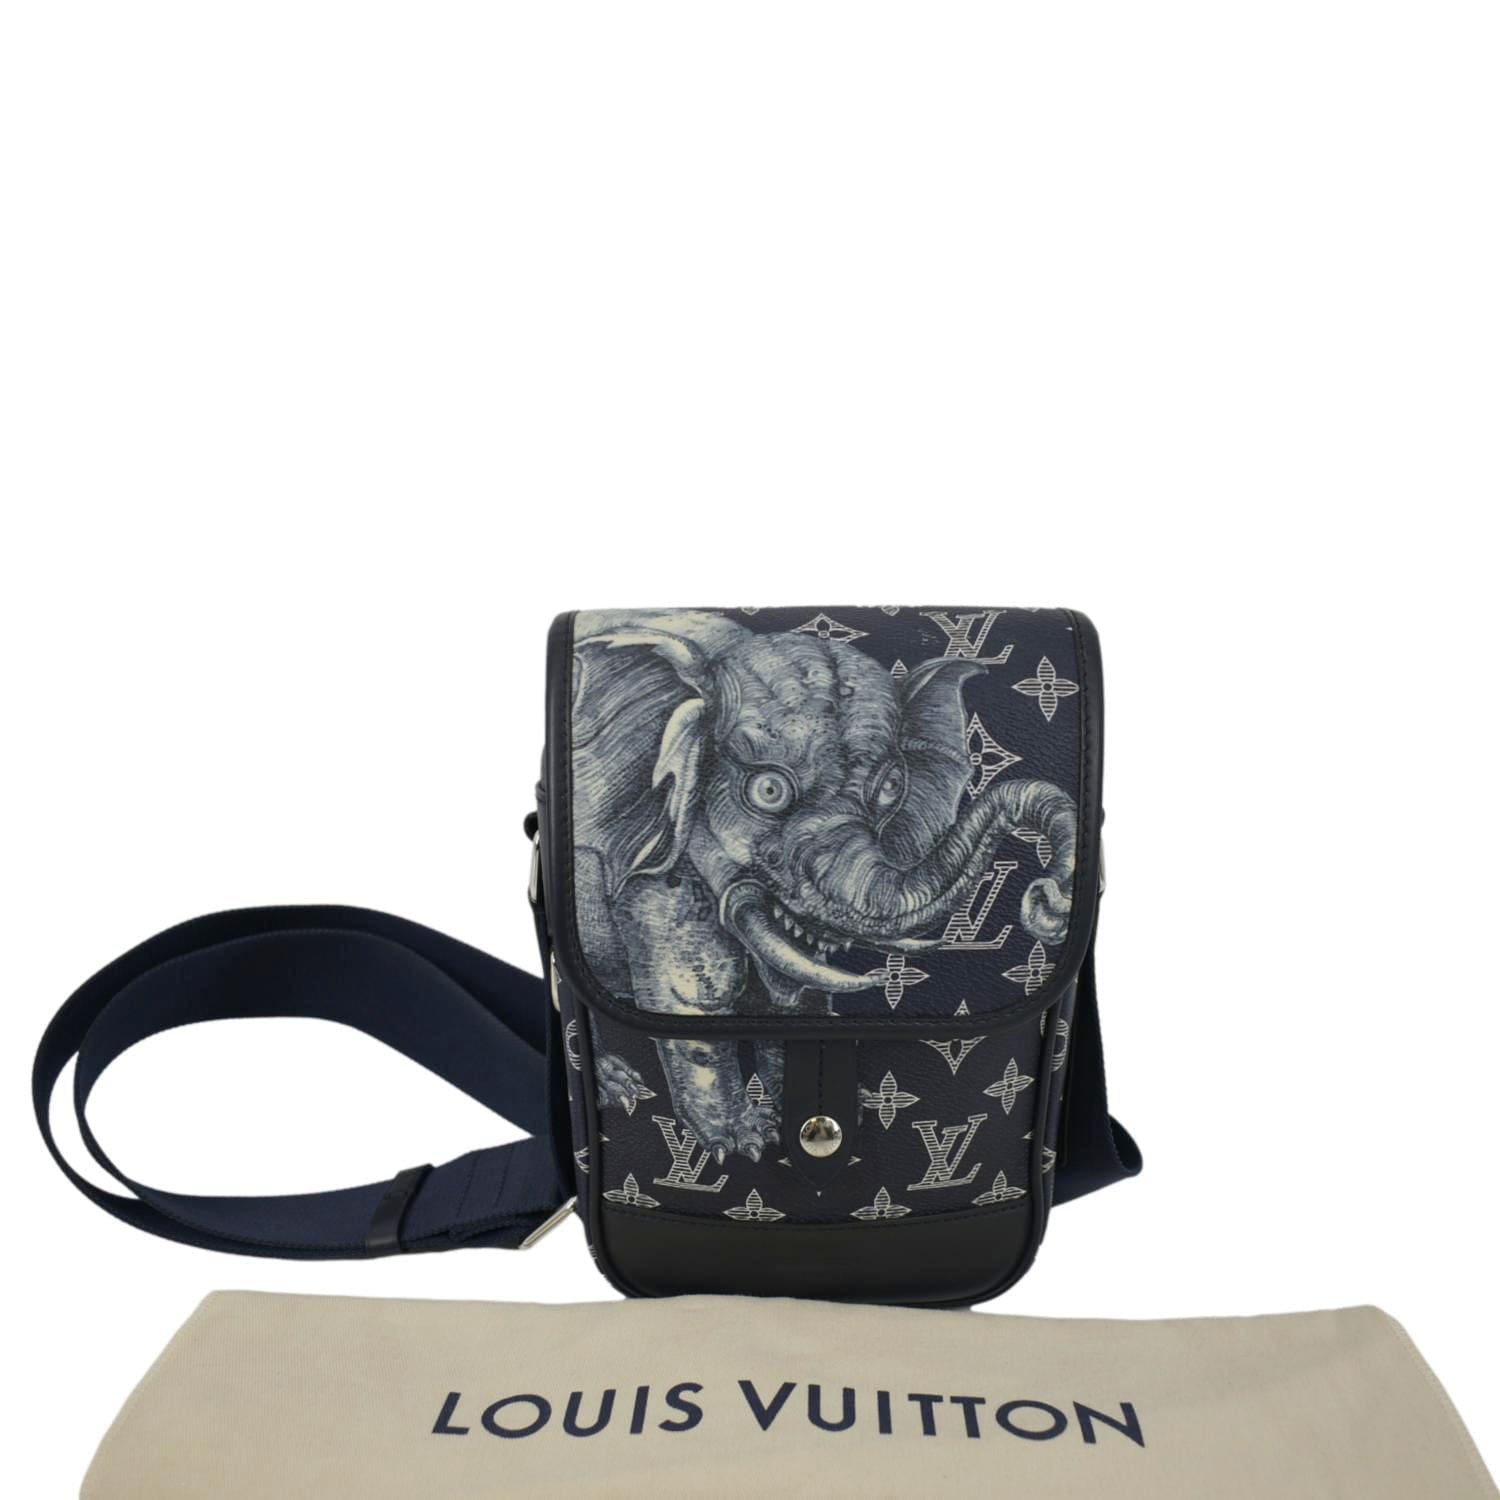 Man with blue leather Louis Vuitton backpack with elephant before